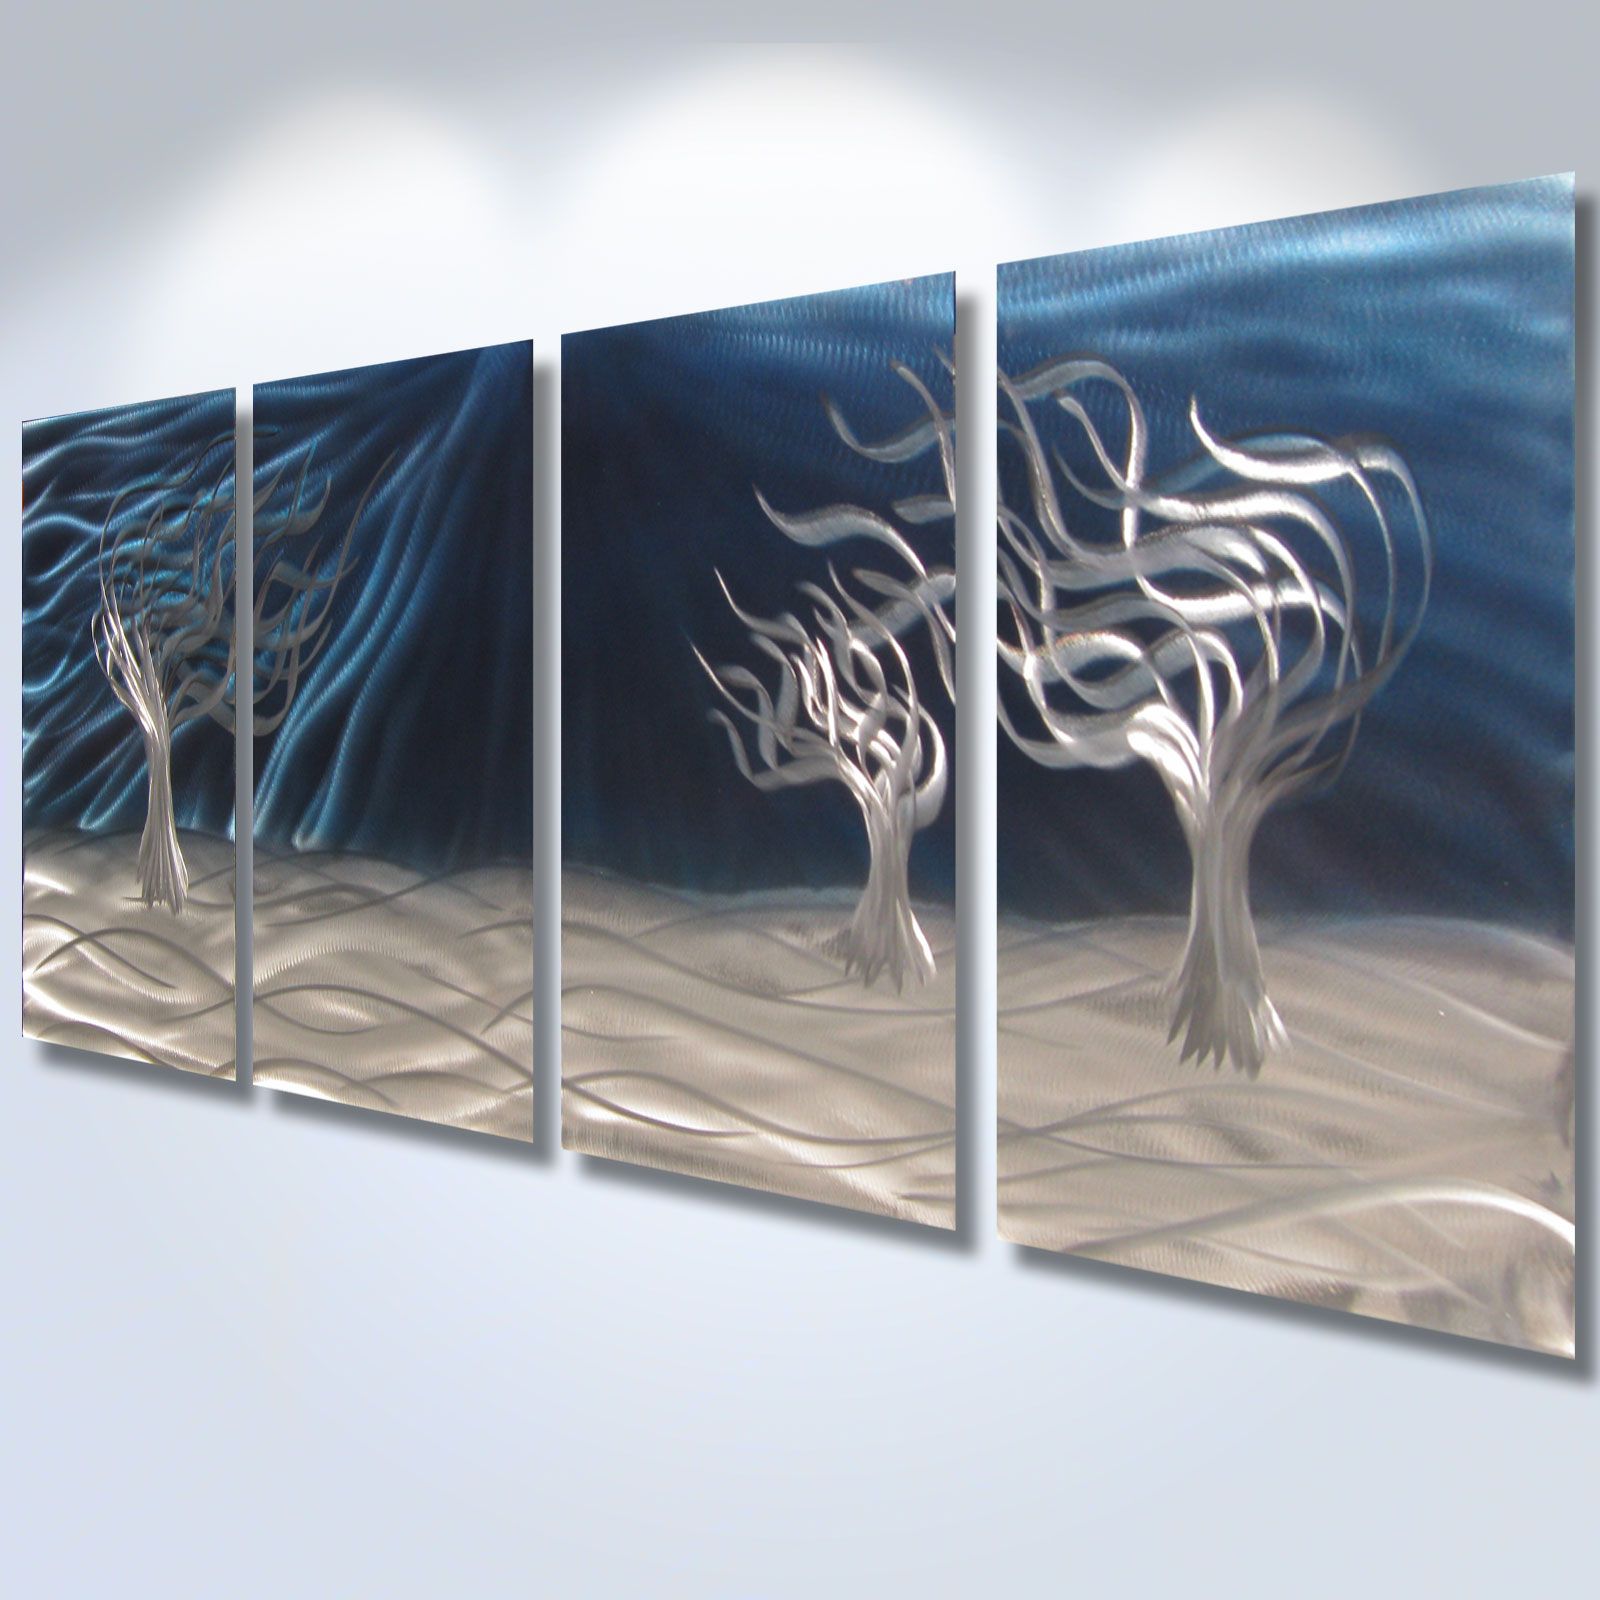 3 Trees Blue – Abstract Metal Wall Art Contemporary Modern Decor Inside Trees Silver Wall Art (View 2 of 15)